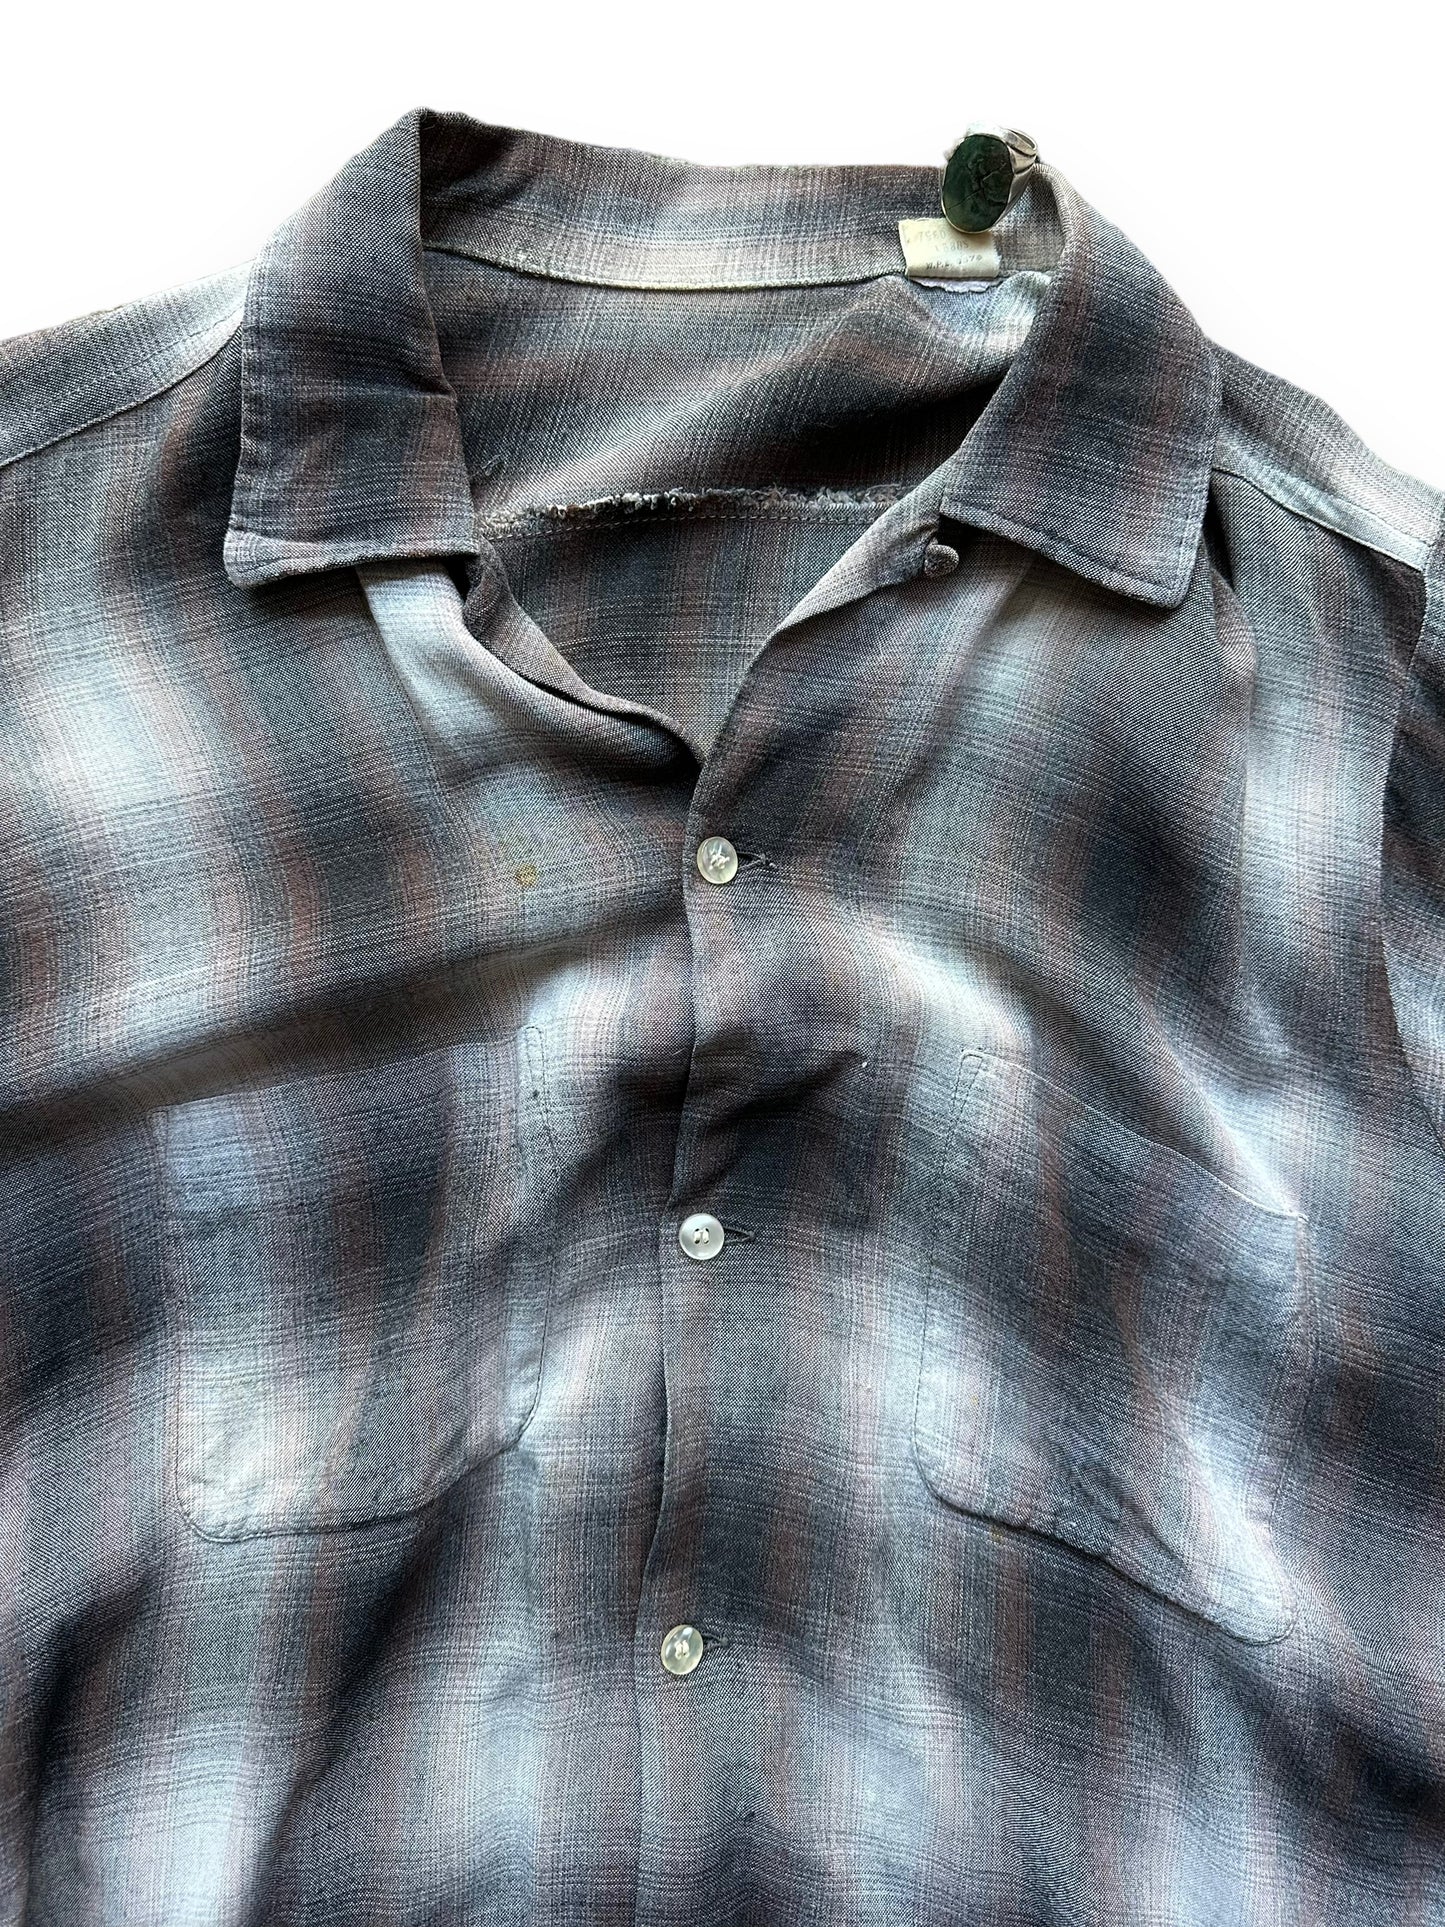 Upper Front View as well as slight stain on Vintage Arrow Chevella Shadow Plaid Rayon Shirt SZ L | Vintage Rayon Shirt Seattle | Barn Owl Vintage Seattle